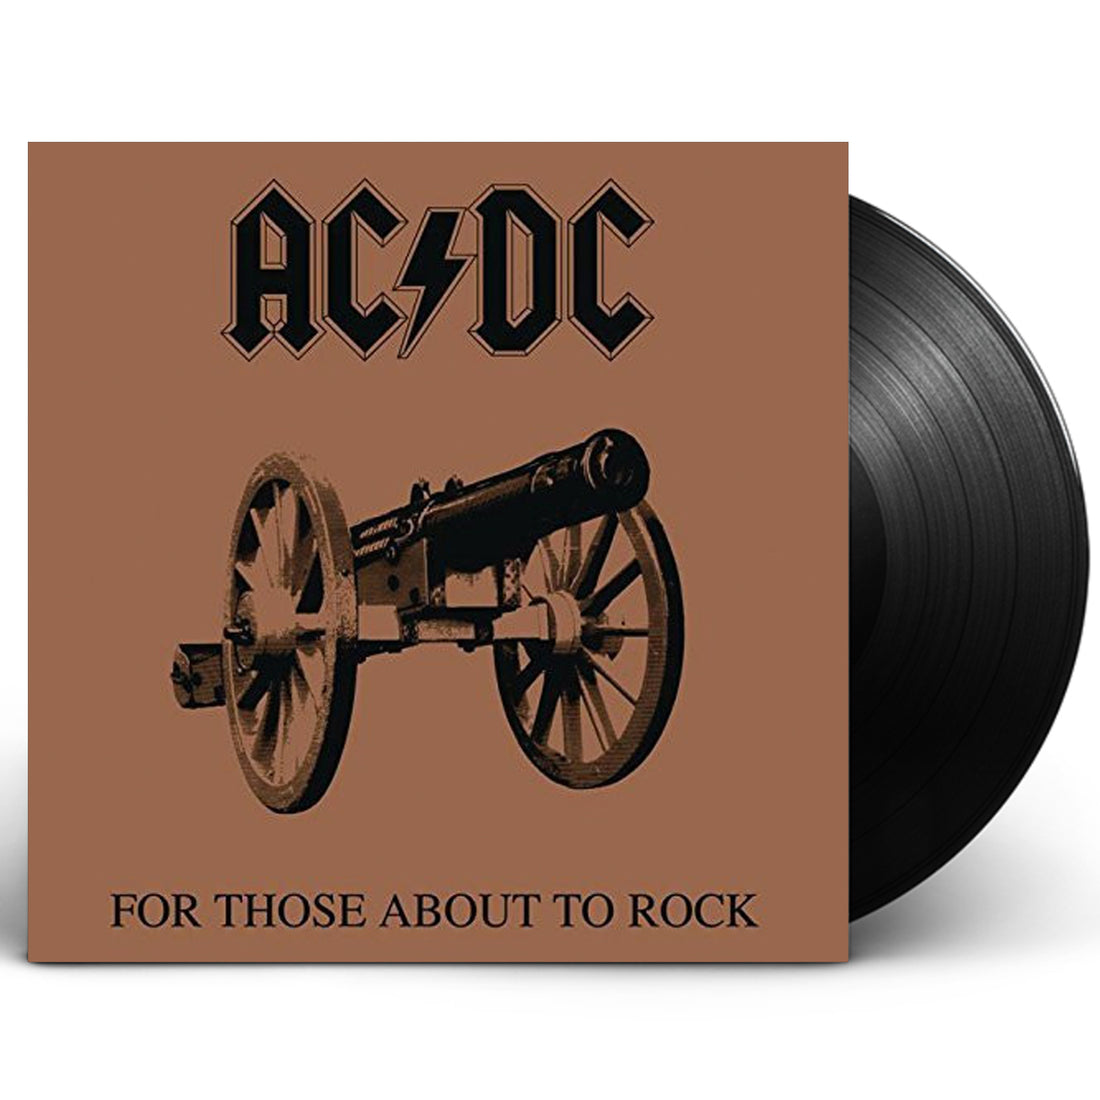 AC/DC "For Those About to Rock" 180 Gram LP Vinyl